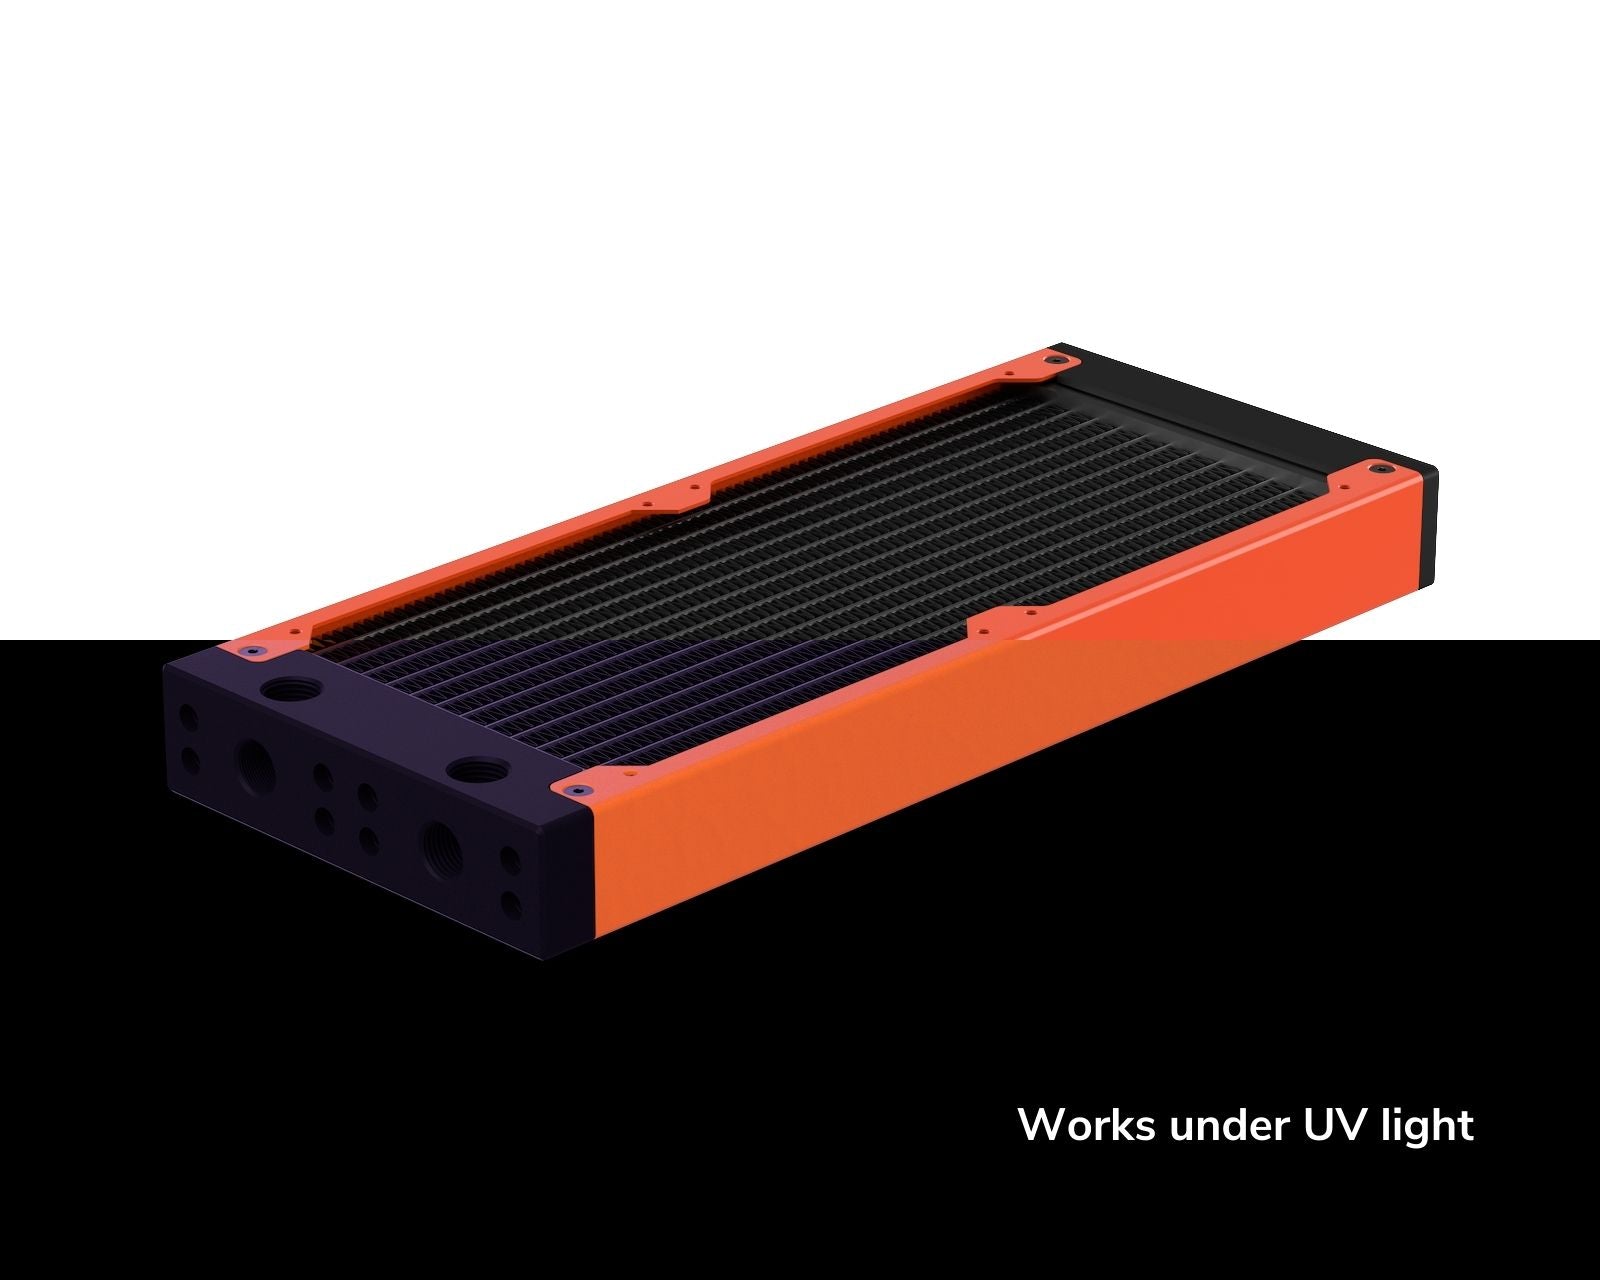 PrimoChill 240SL (30mm) EXIMO Modular Radiator, Black POM, 2x120mm, Dual Fan (R-SL-BK24) Available in 20+ Colors, Assembled in USA and Custom Watercooling Loop Ready - UV Orange